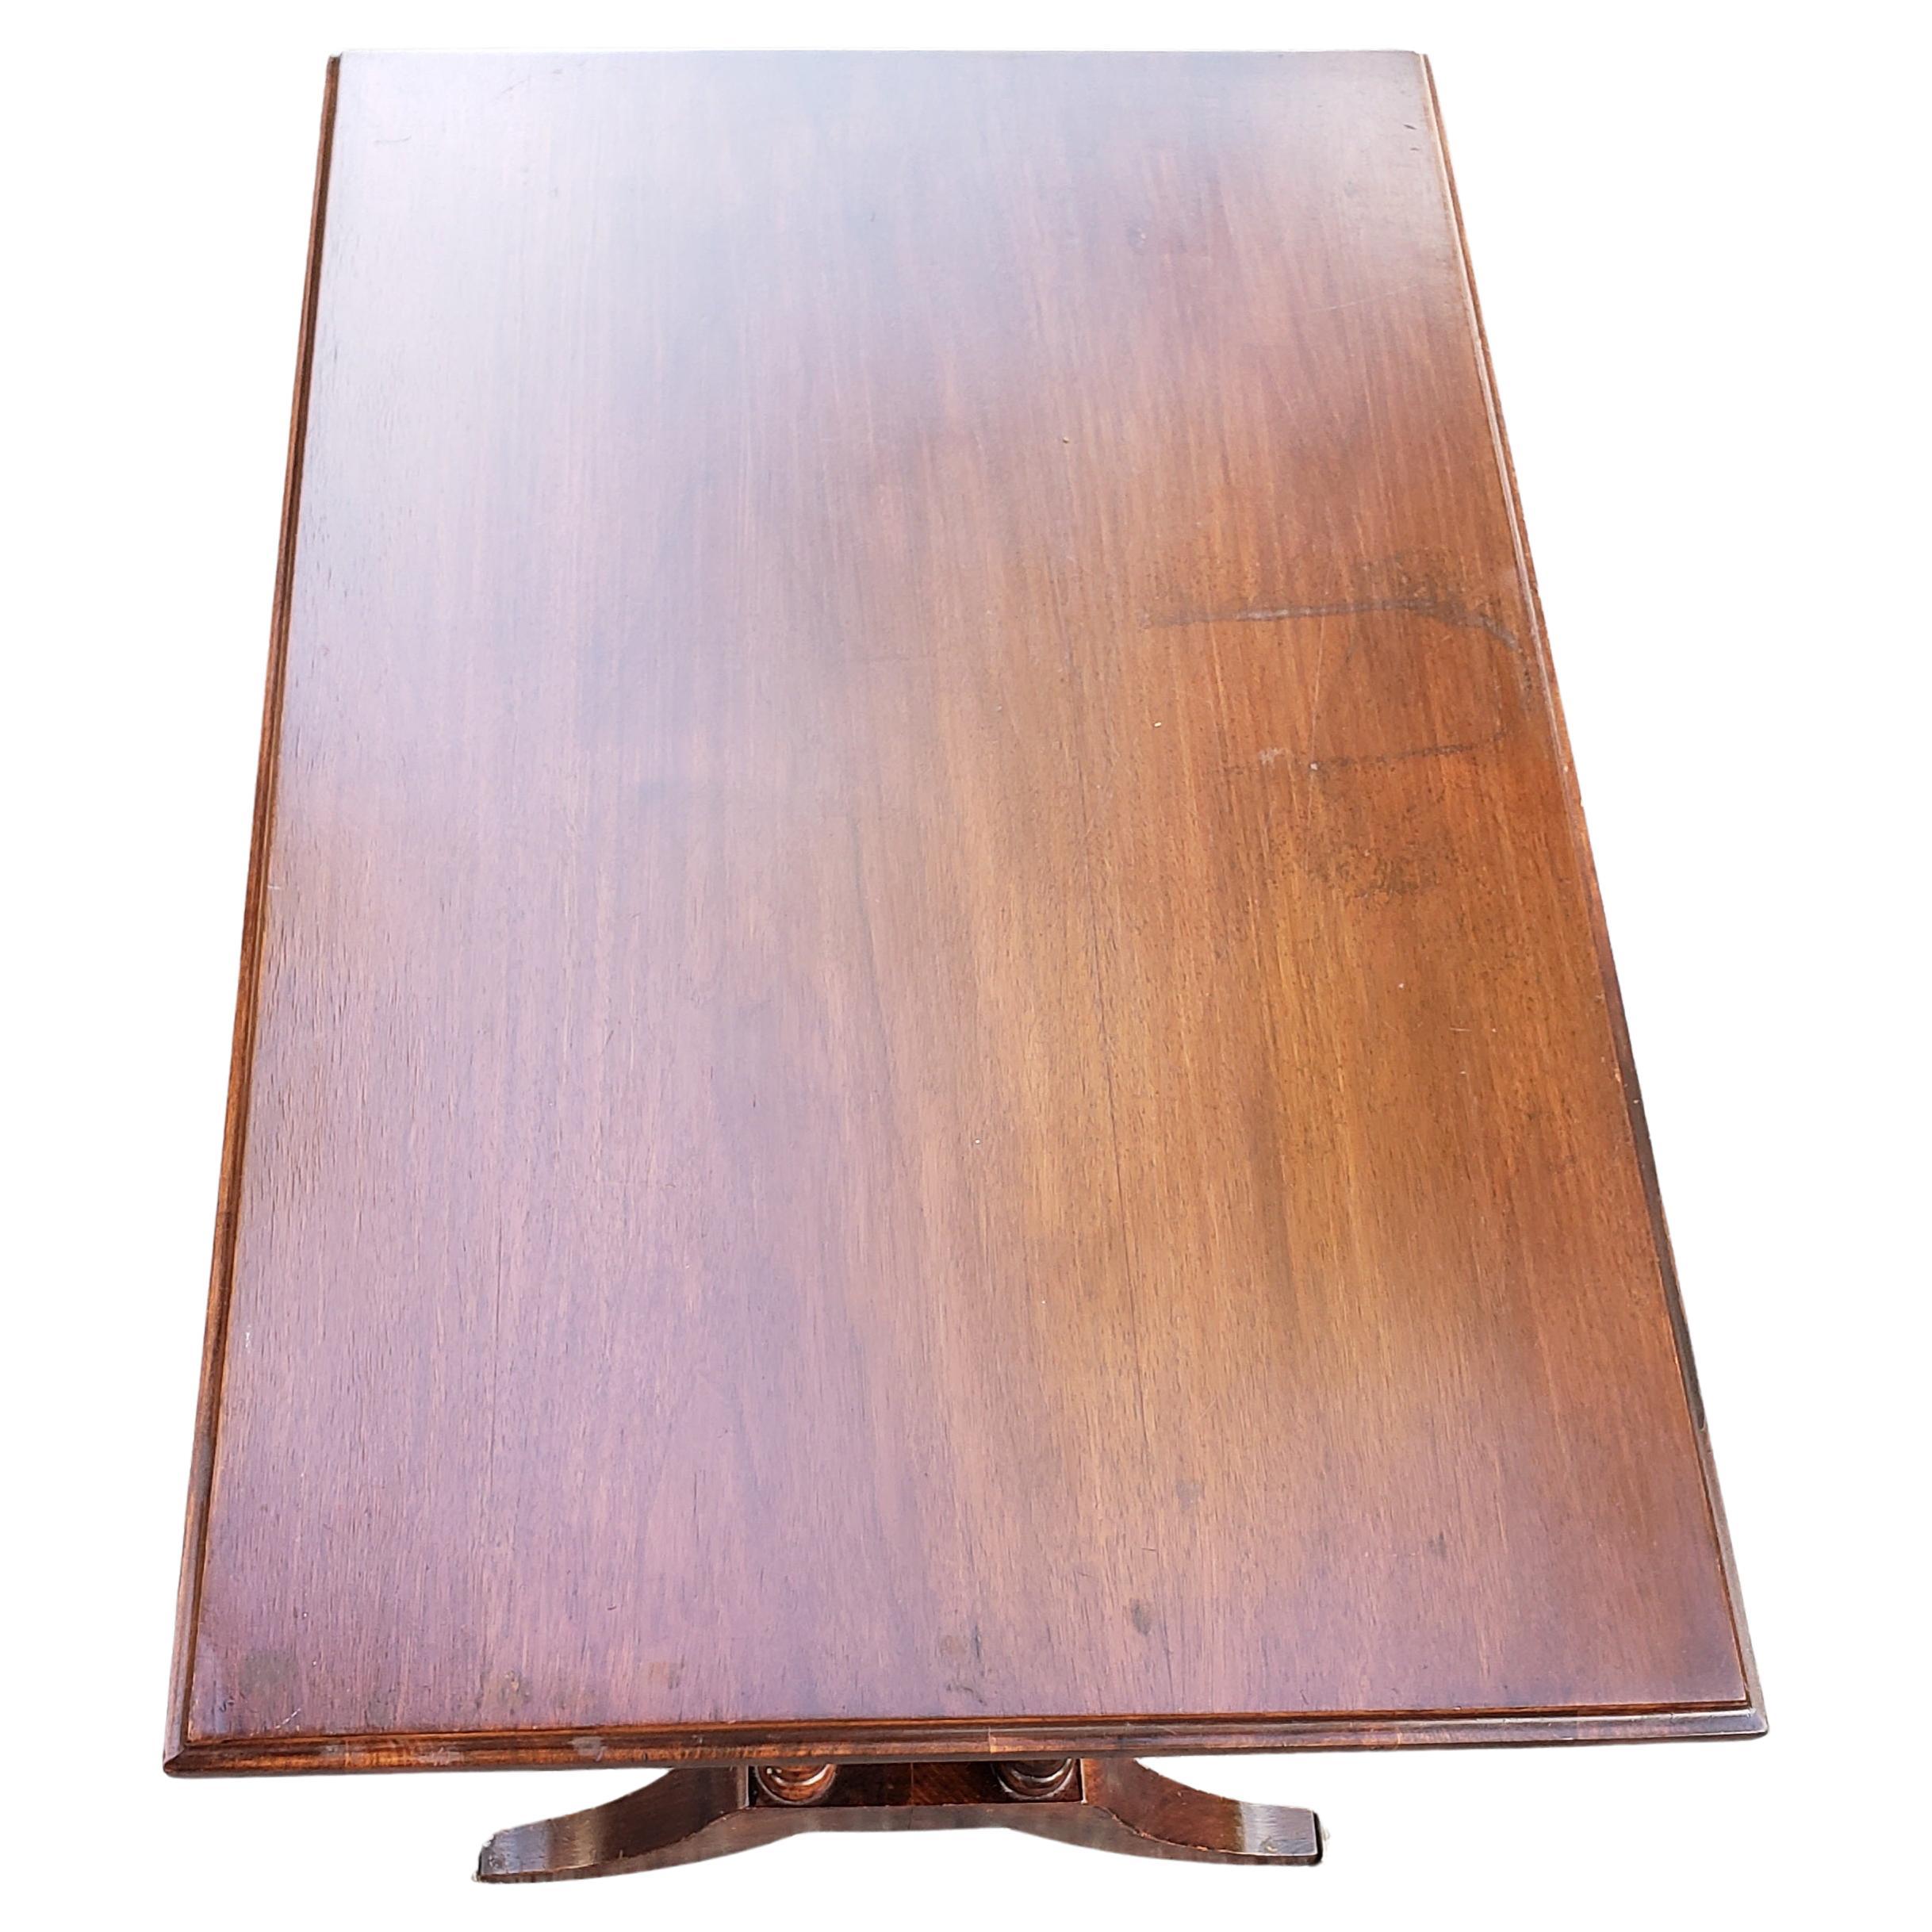 Vintage Small Space American Mahogany Tea / Coffee Table, circa 1930s In Good Condition For Sale In Germantown, MD